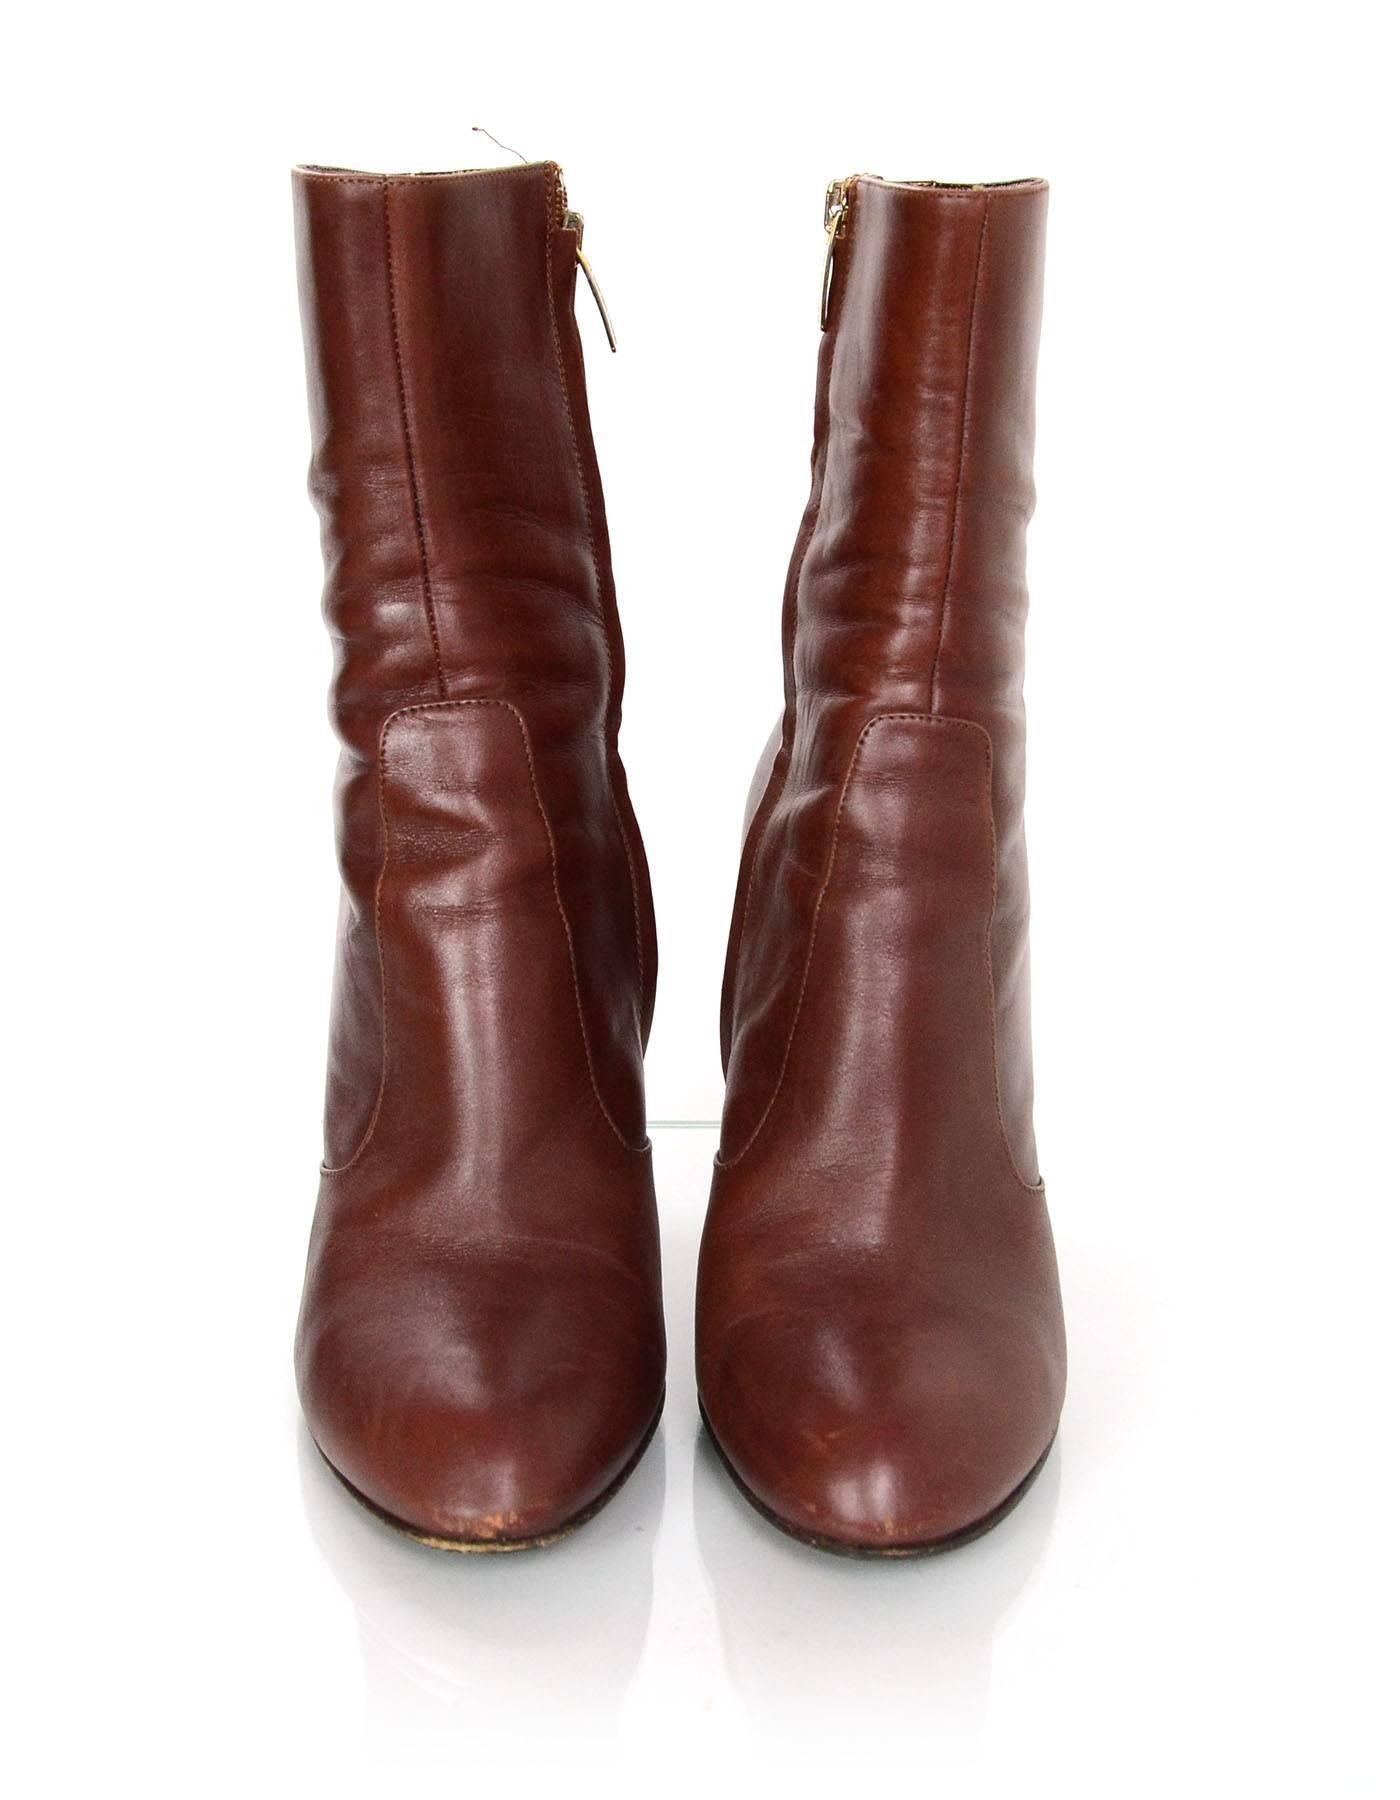 Women's Sergio Rossi Brown Leather Ankle Boots sz 37.5 rt. $675